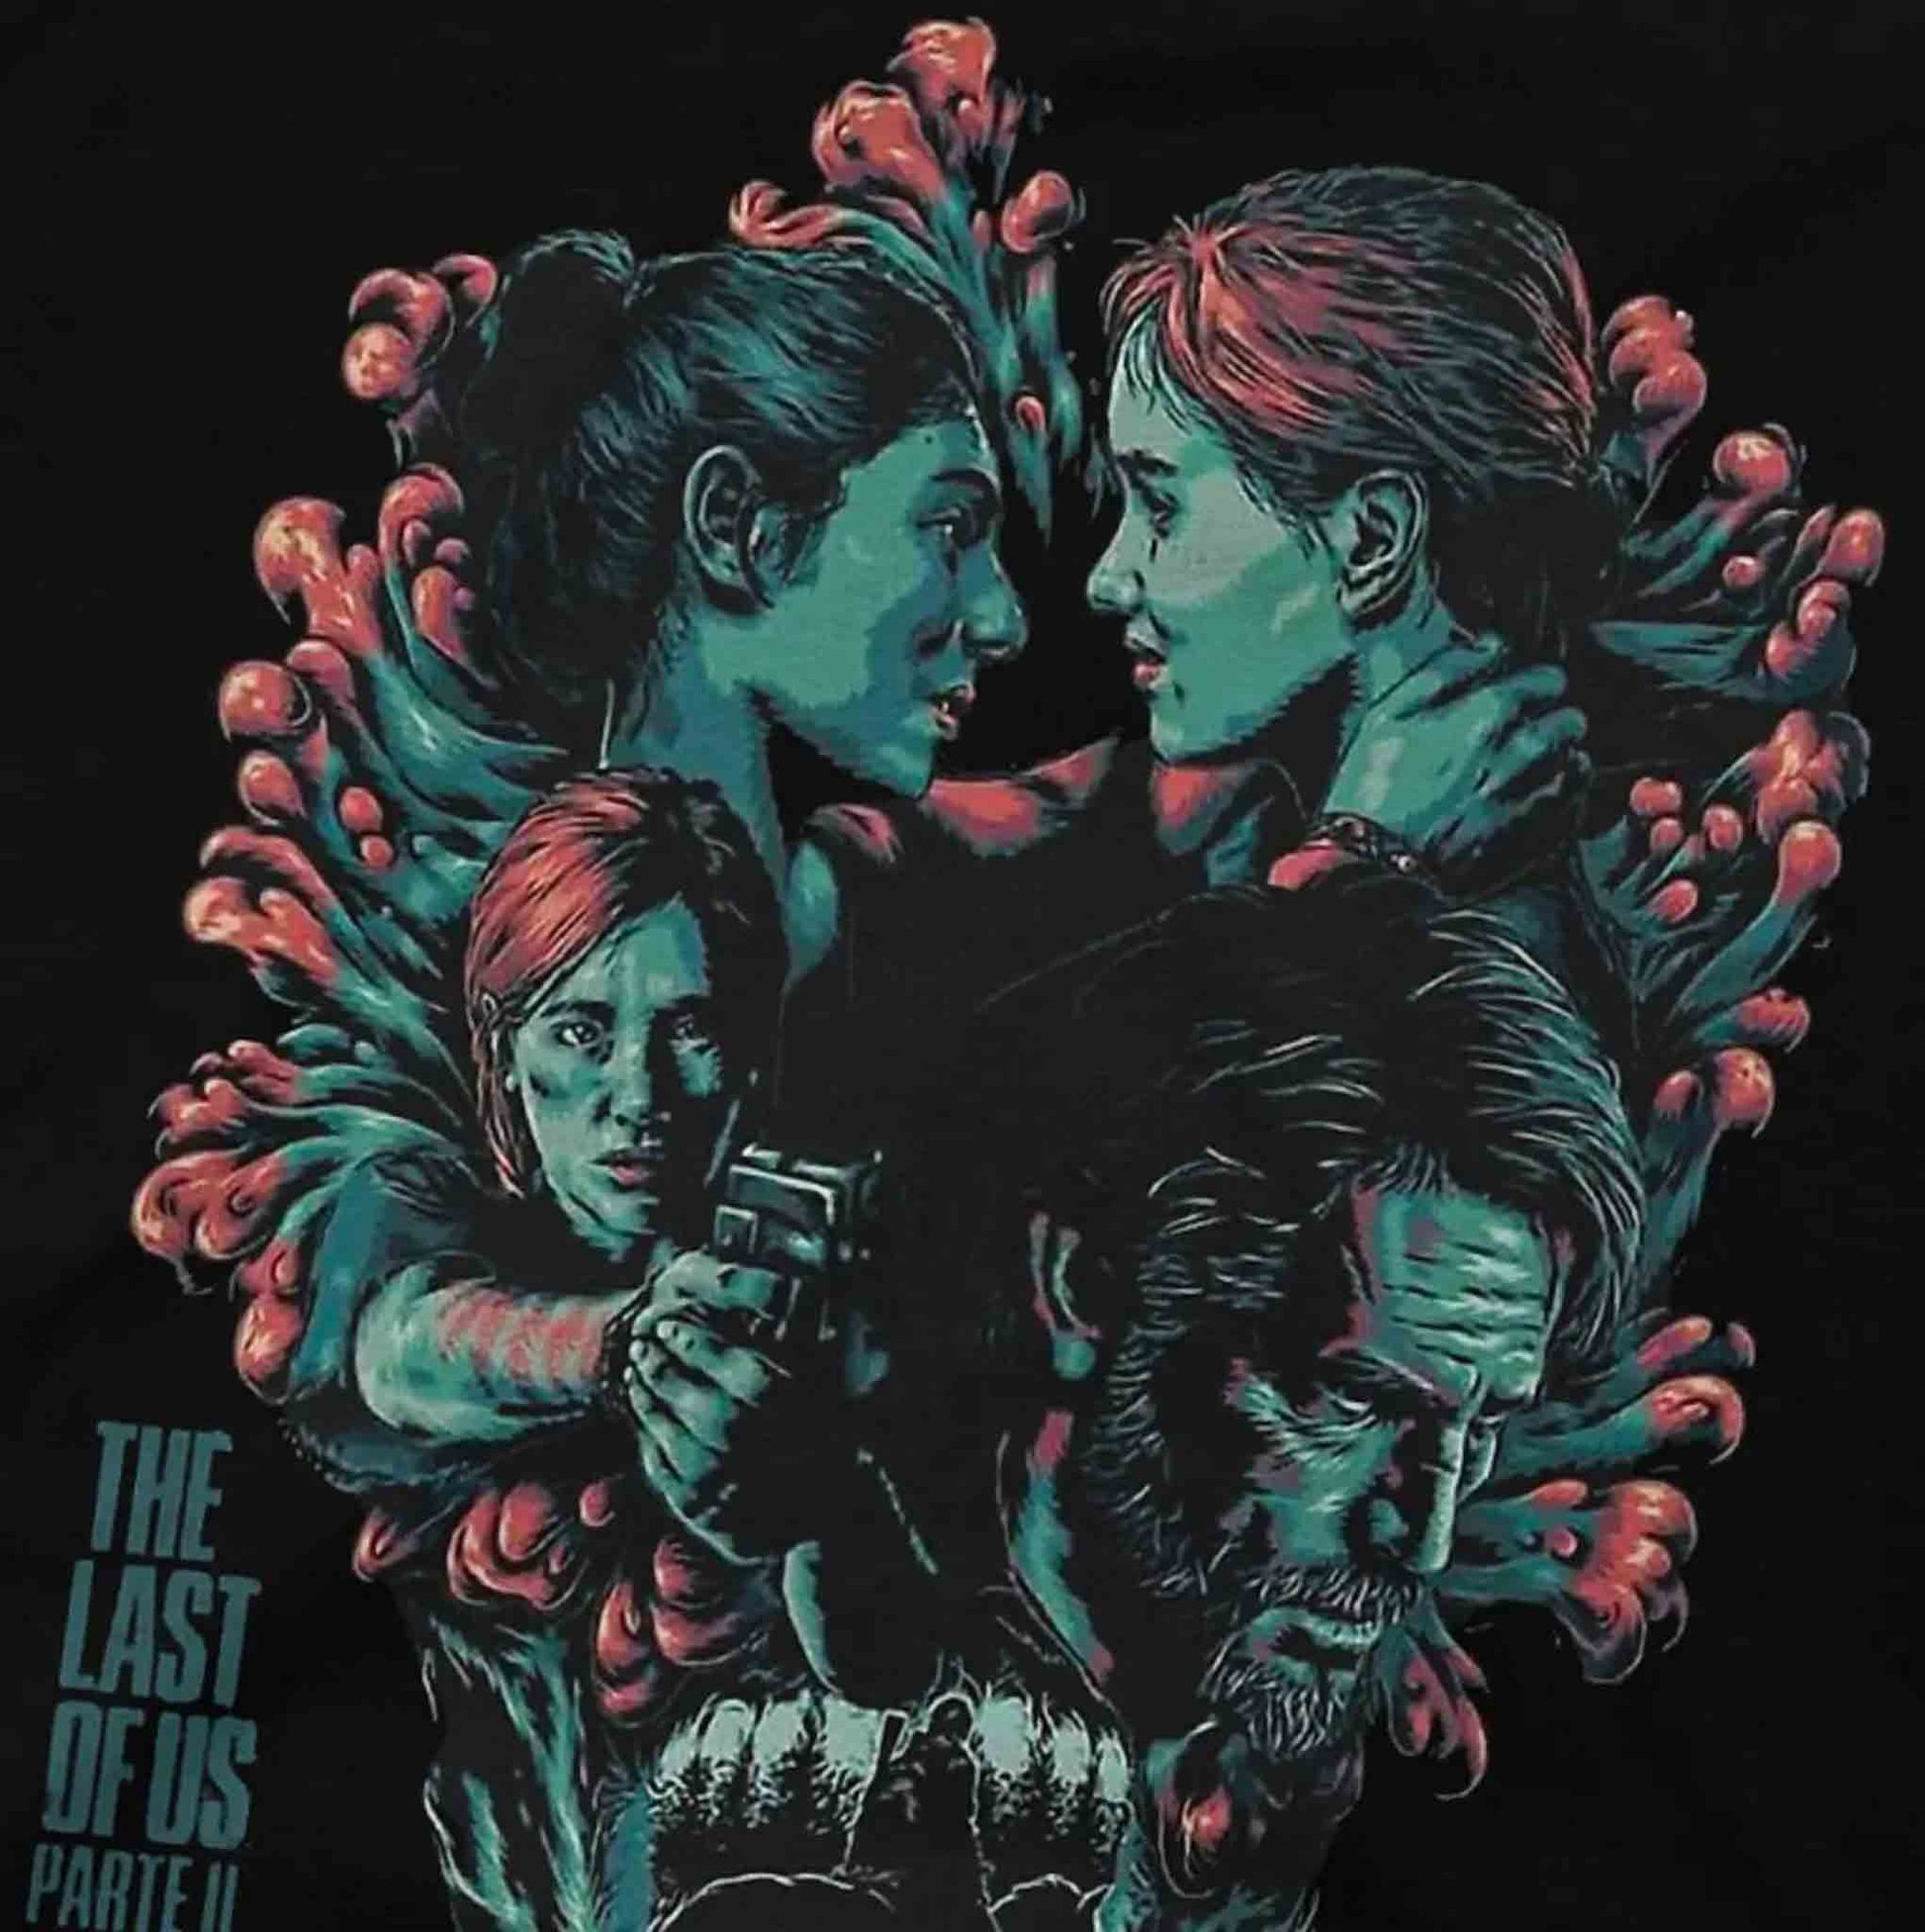 The Last Of Us Part II Cotton Tshirt - Available at 2Fast2See.co